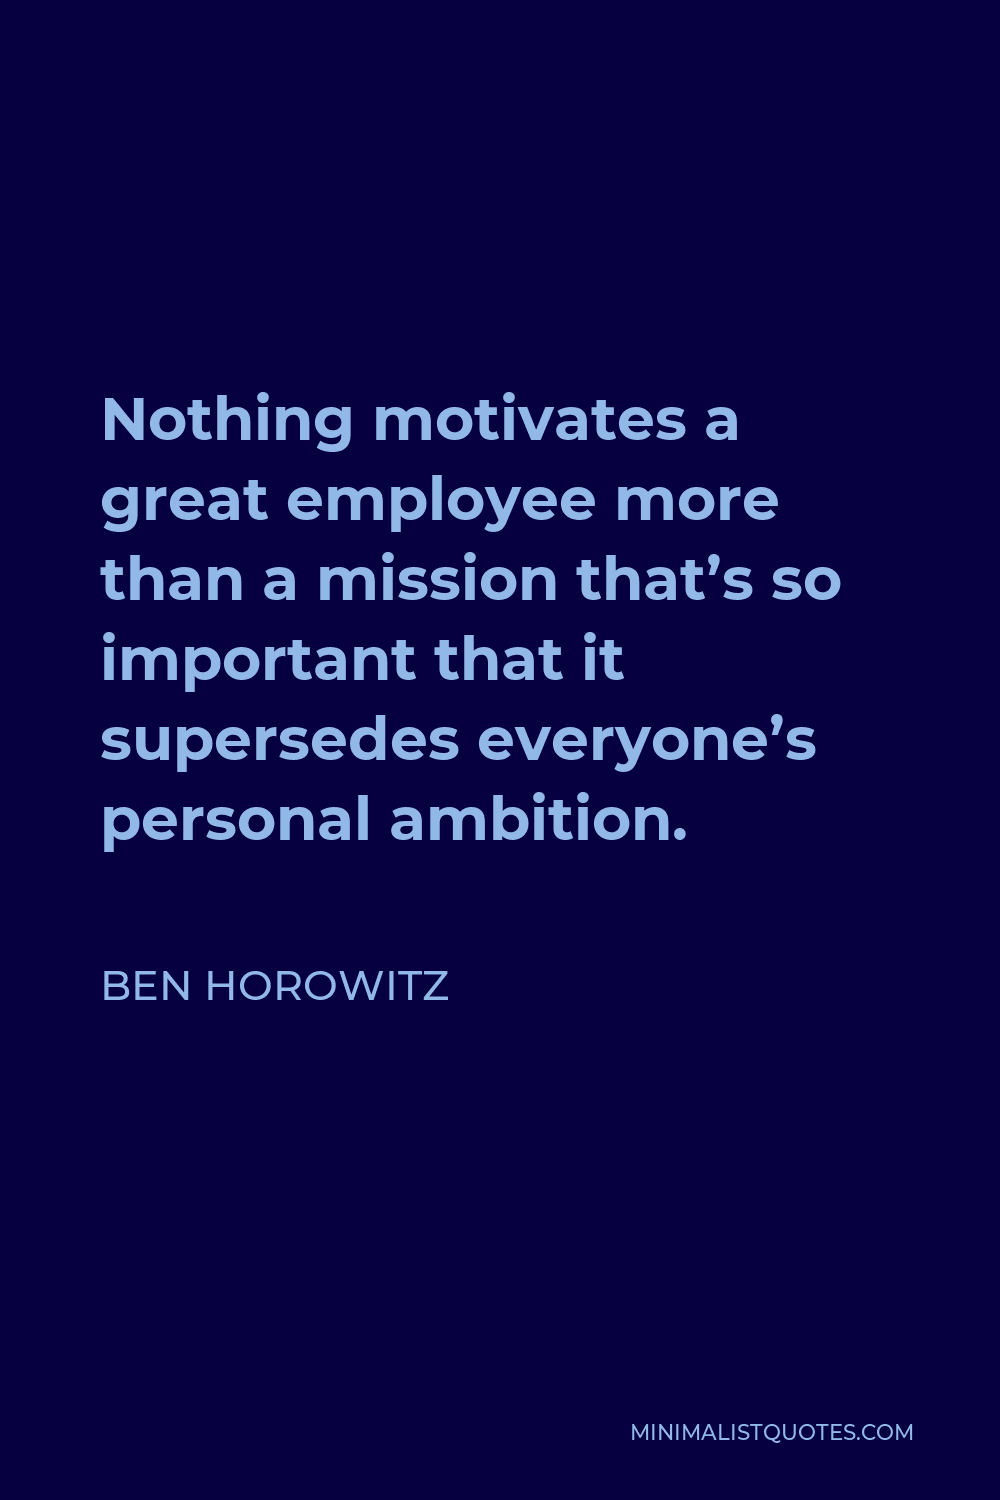 Ben Horowitz Quote - Nothing motivates a great employee more than a mission that’s so important that it supersedes everyone’s personal ambition.